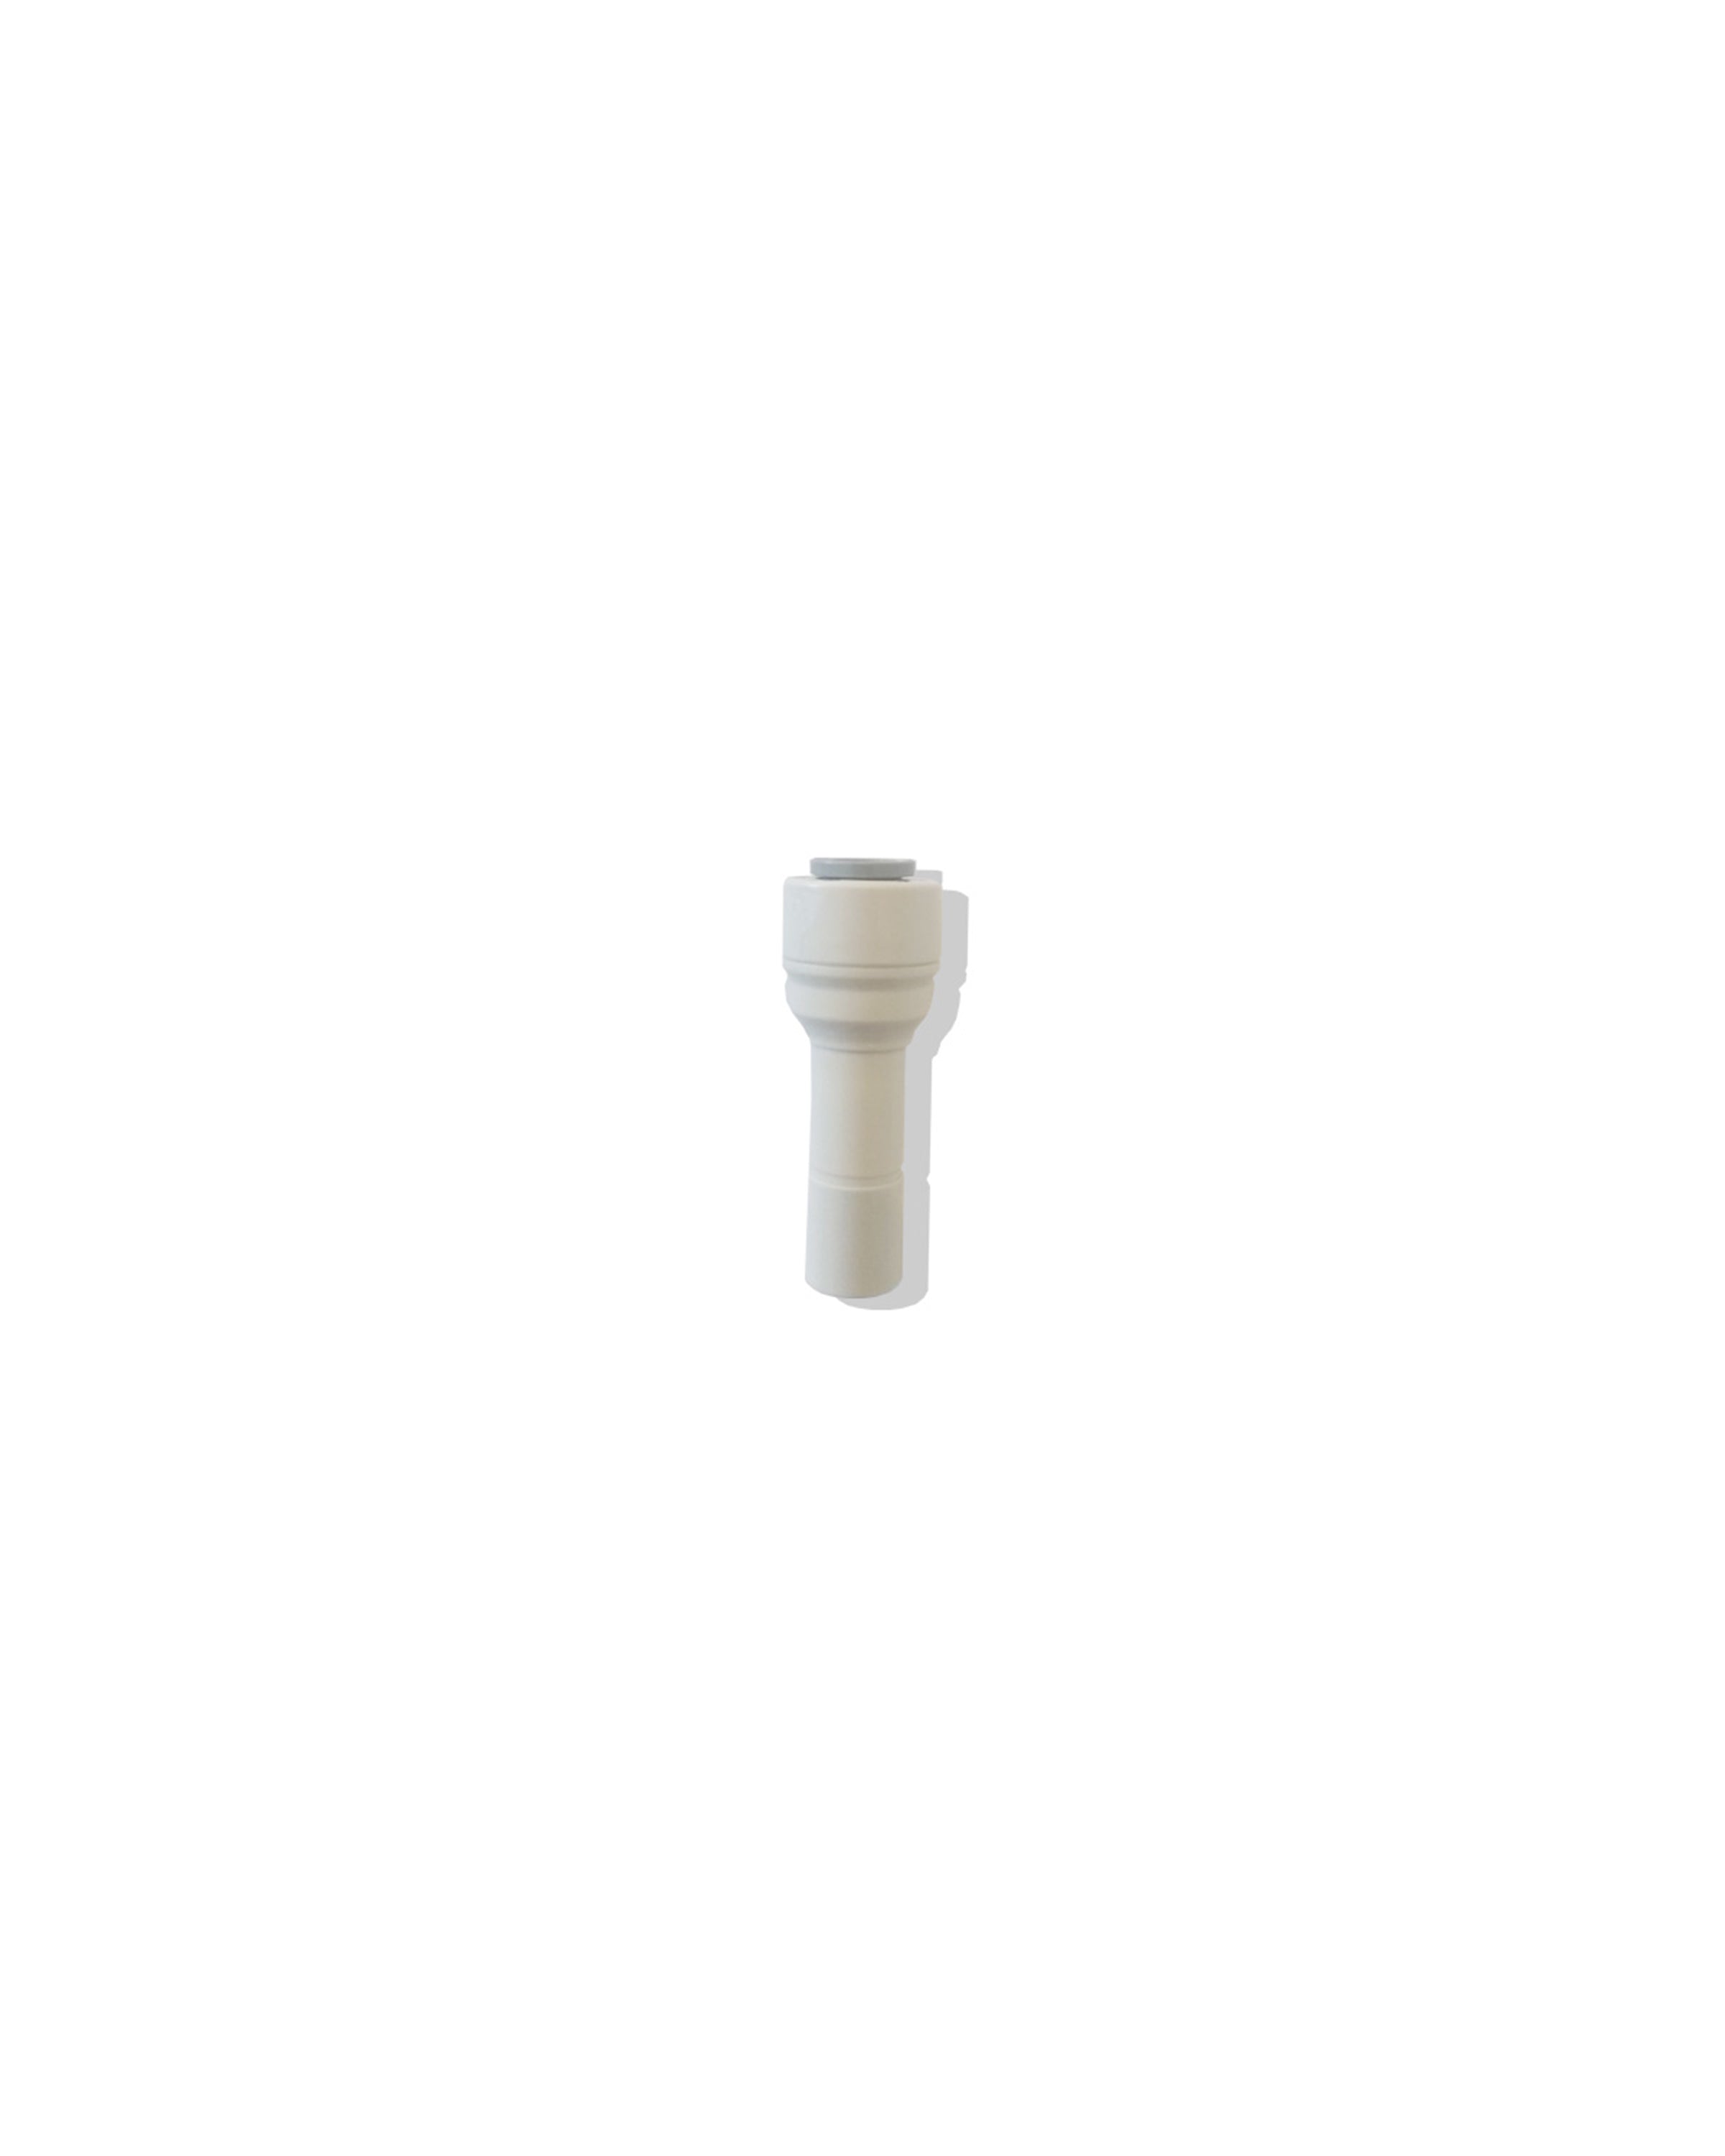 y connector reducer part for portable misting system